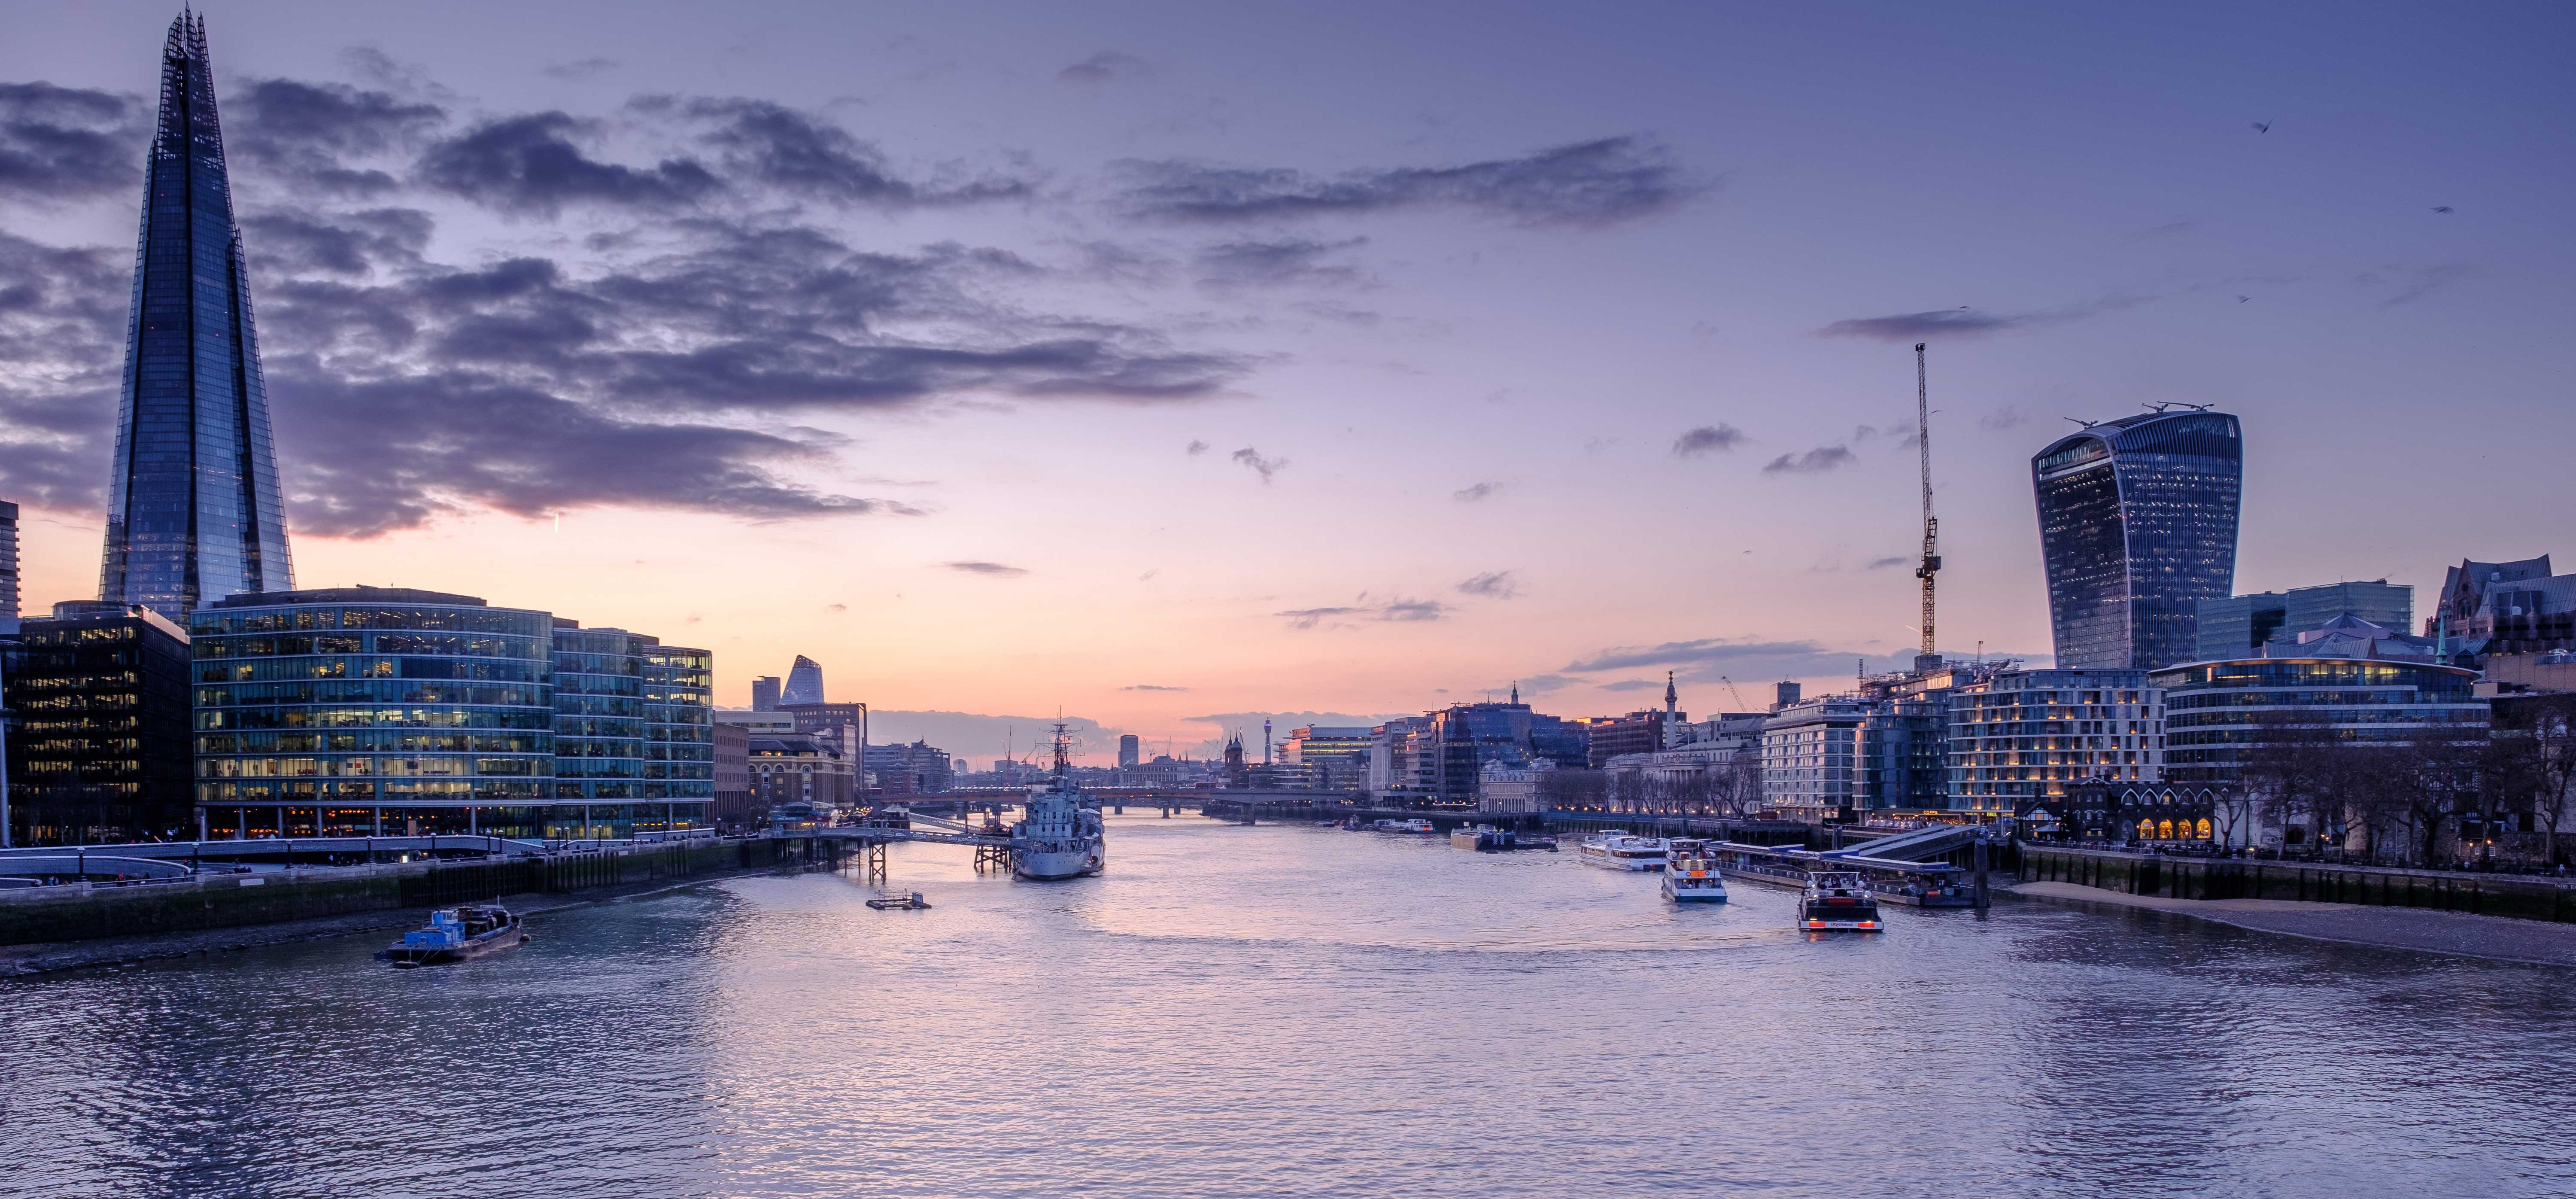 Global factors influencing the future of the tidal Thames